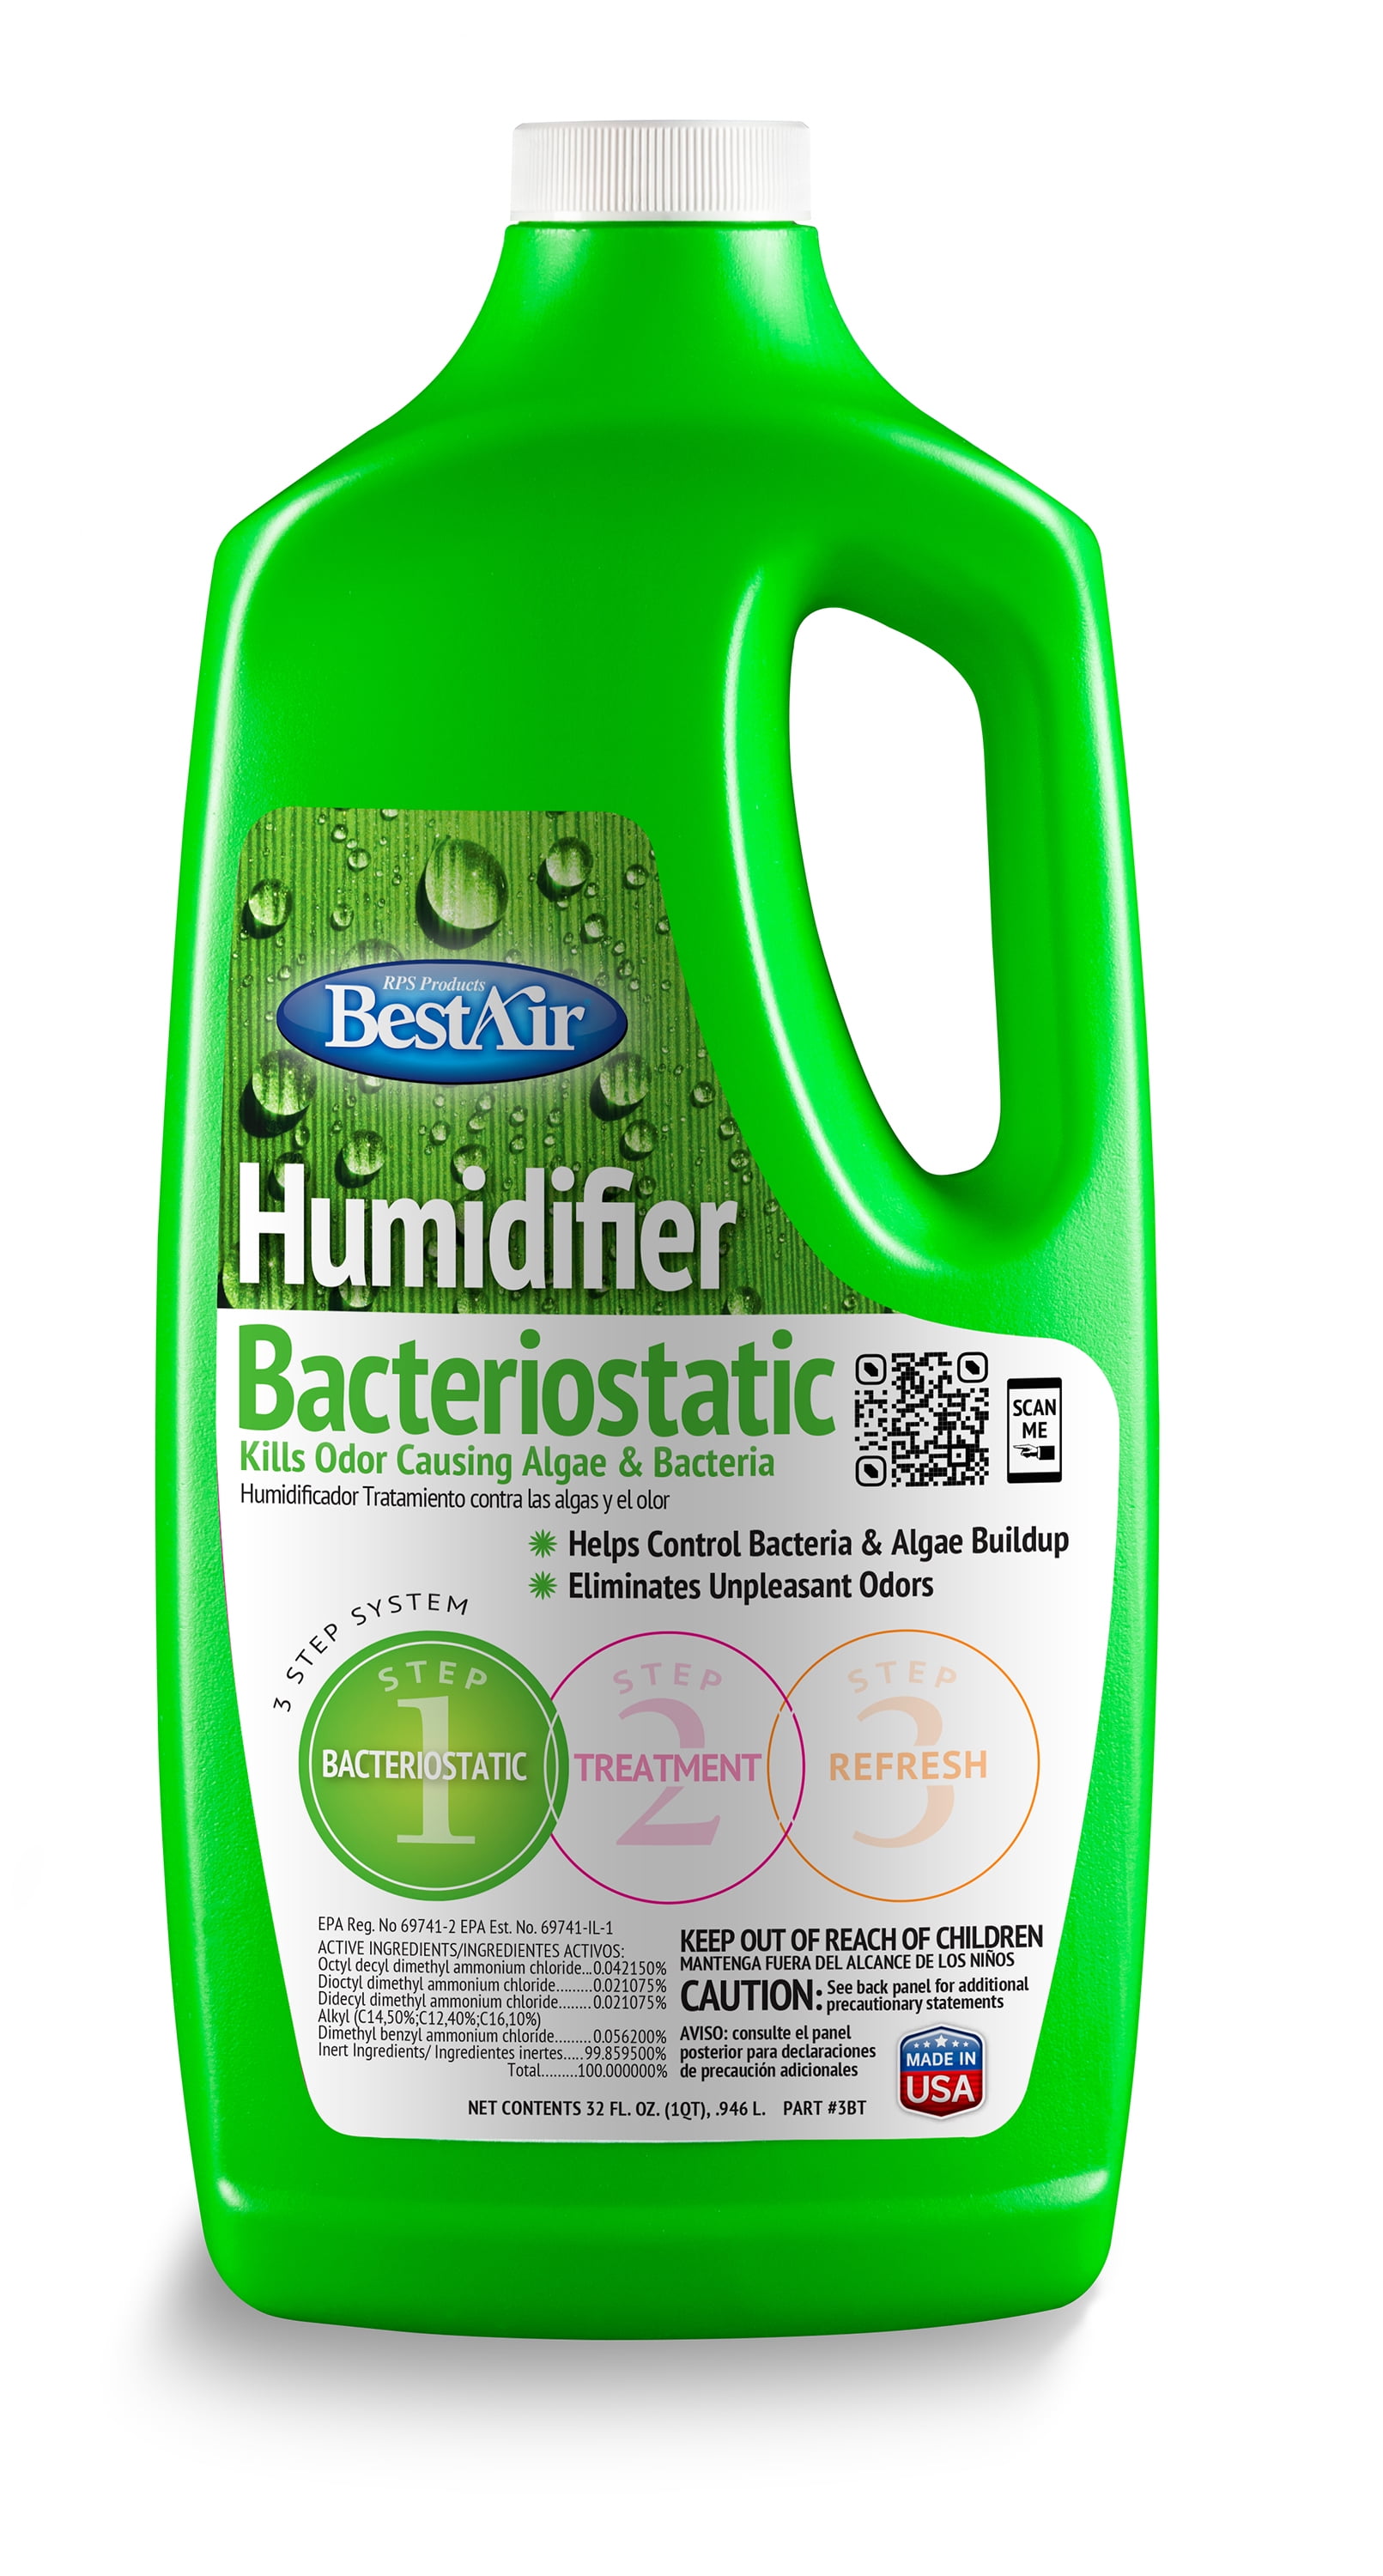 BestAir 3BT Original BT Humidifier Bacteriostatic Water Treatment, 32 fl oz for all evaporative type humidifiers